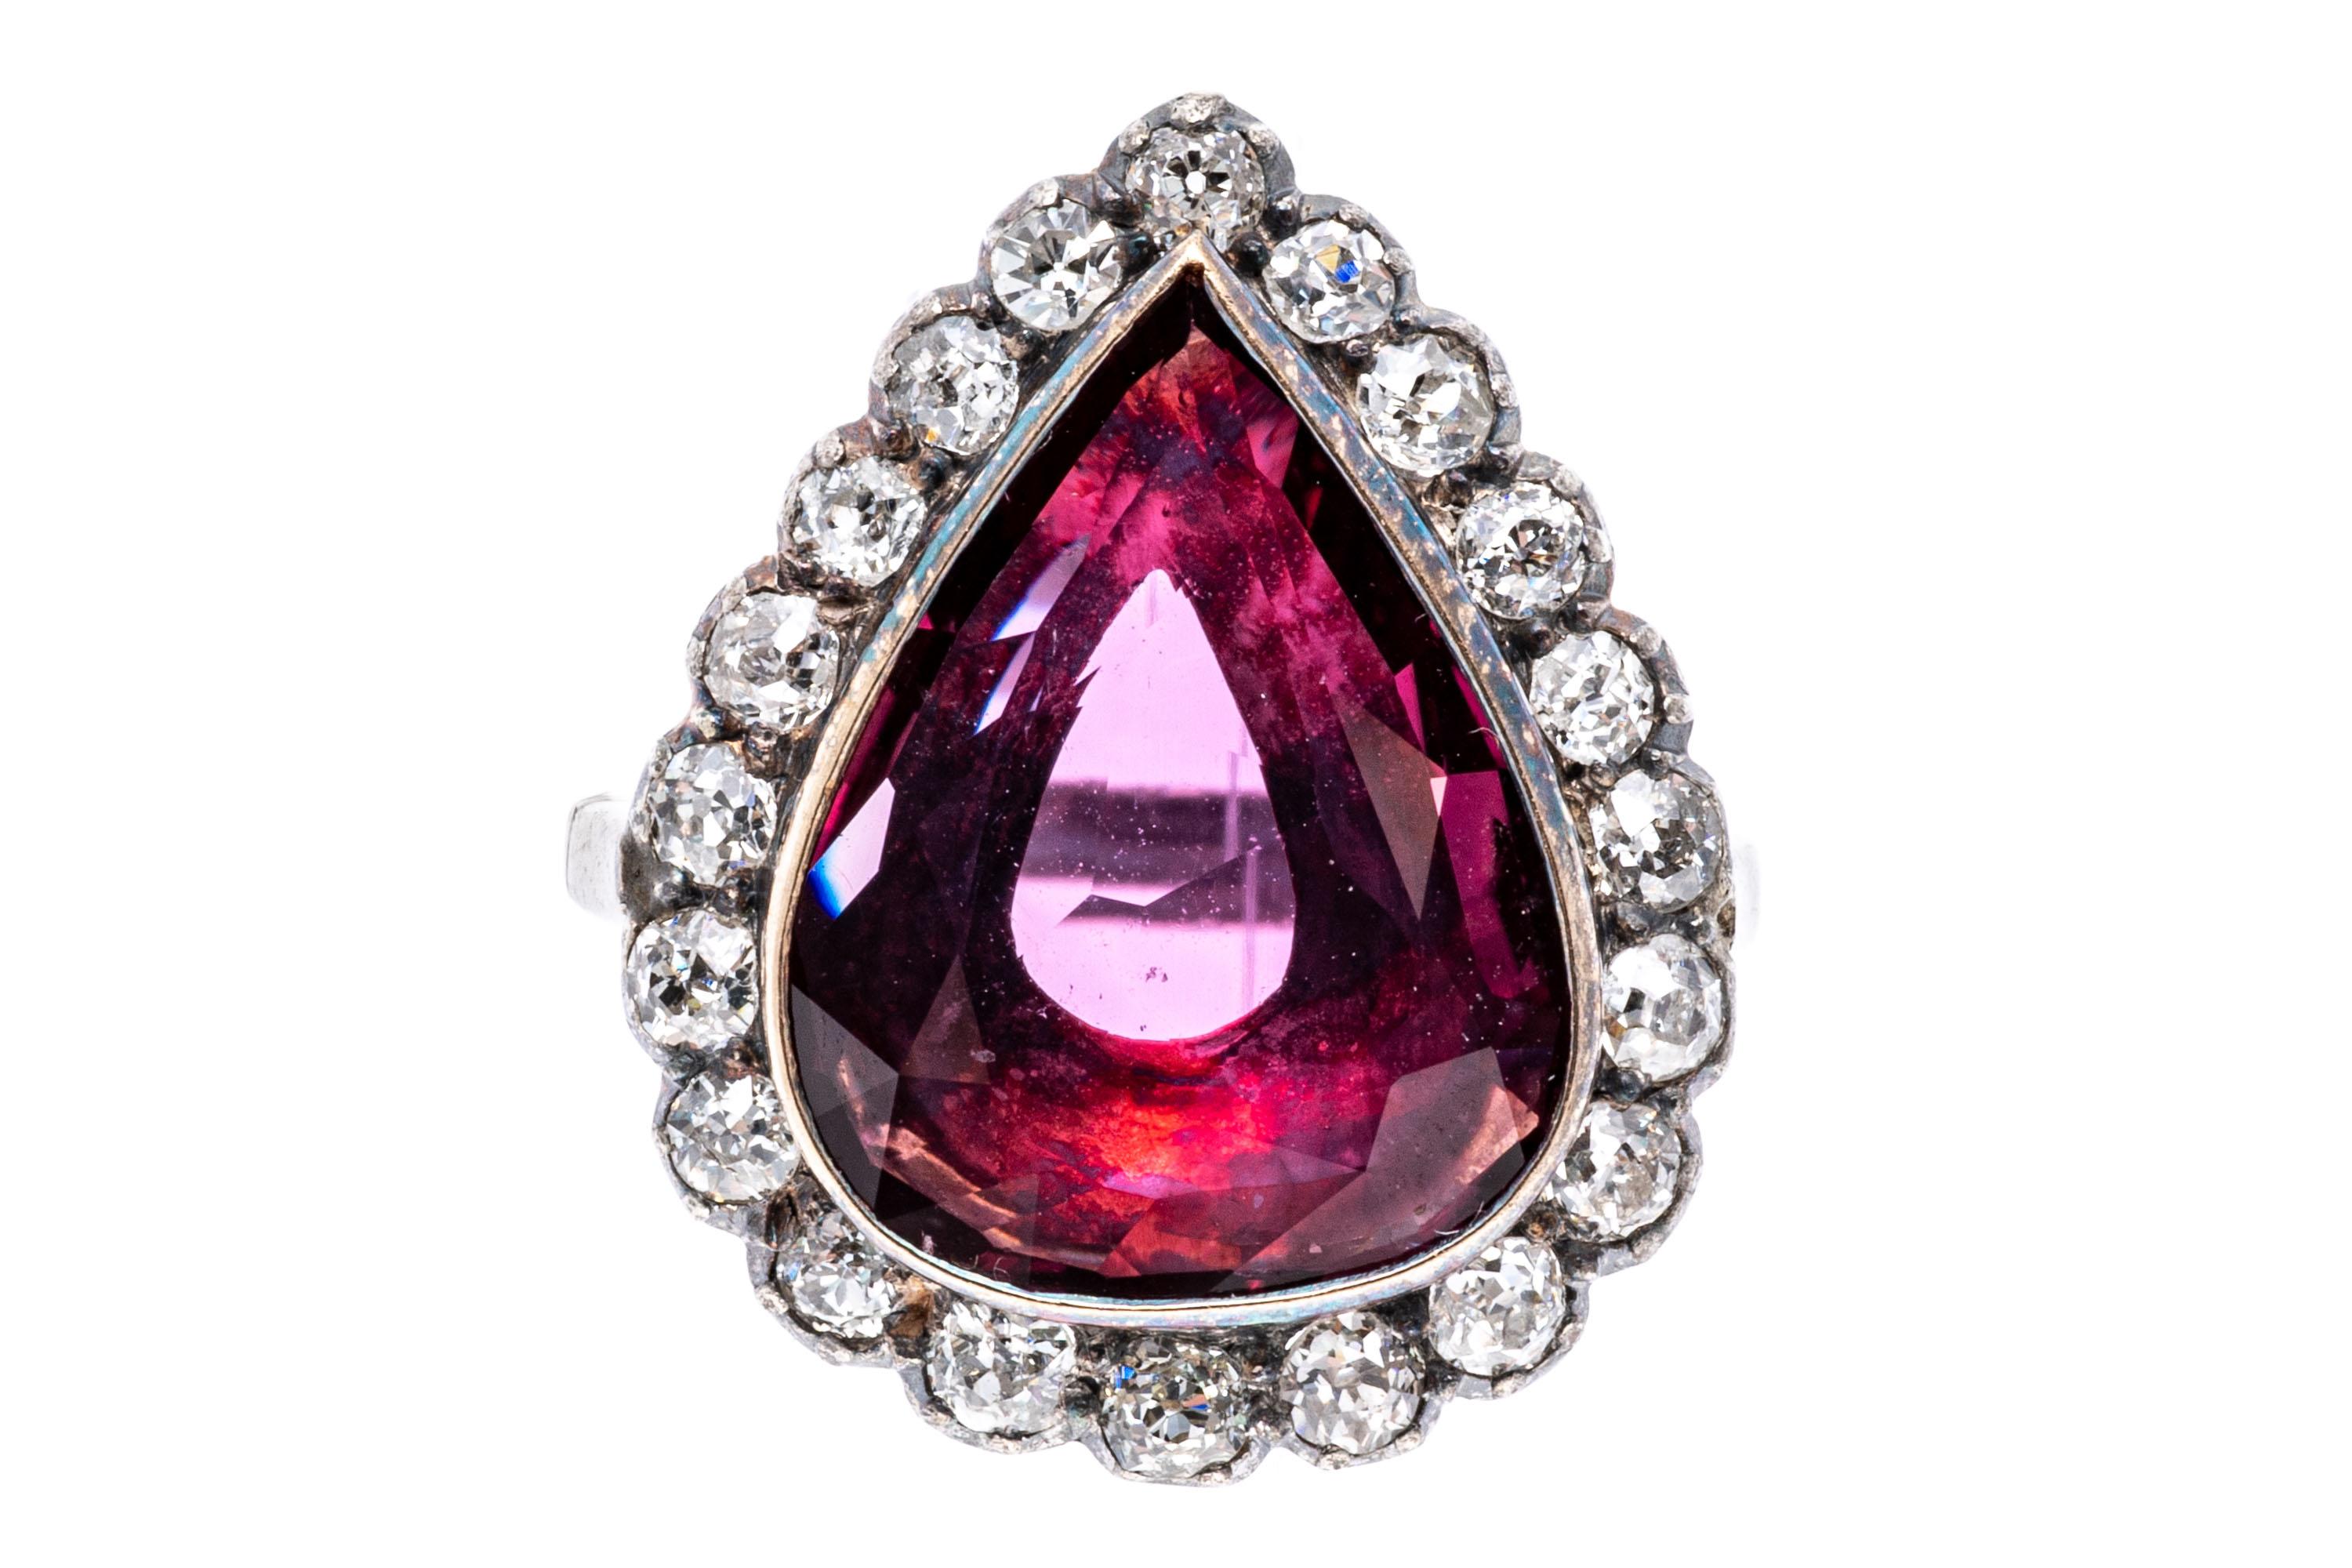 10k white gold ring. This beautiful vintage white gold ring has a center pear shaped faceted, reddish pink color ruby, approximately 2.71 CTS, bezel set and framed with a halo of old mine cut diamonds, approximately 0.30 TCW, prong set.
Marks: None,